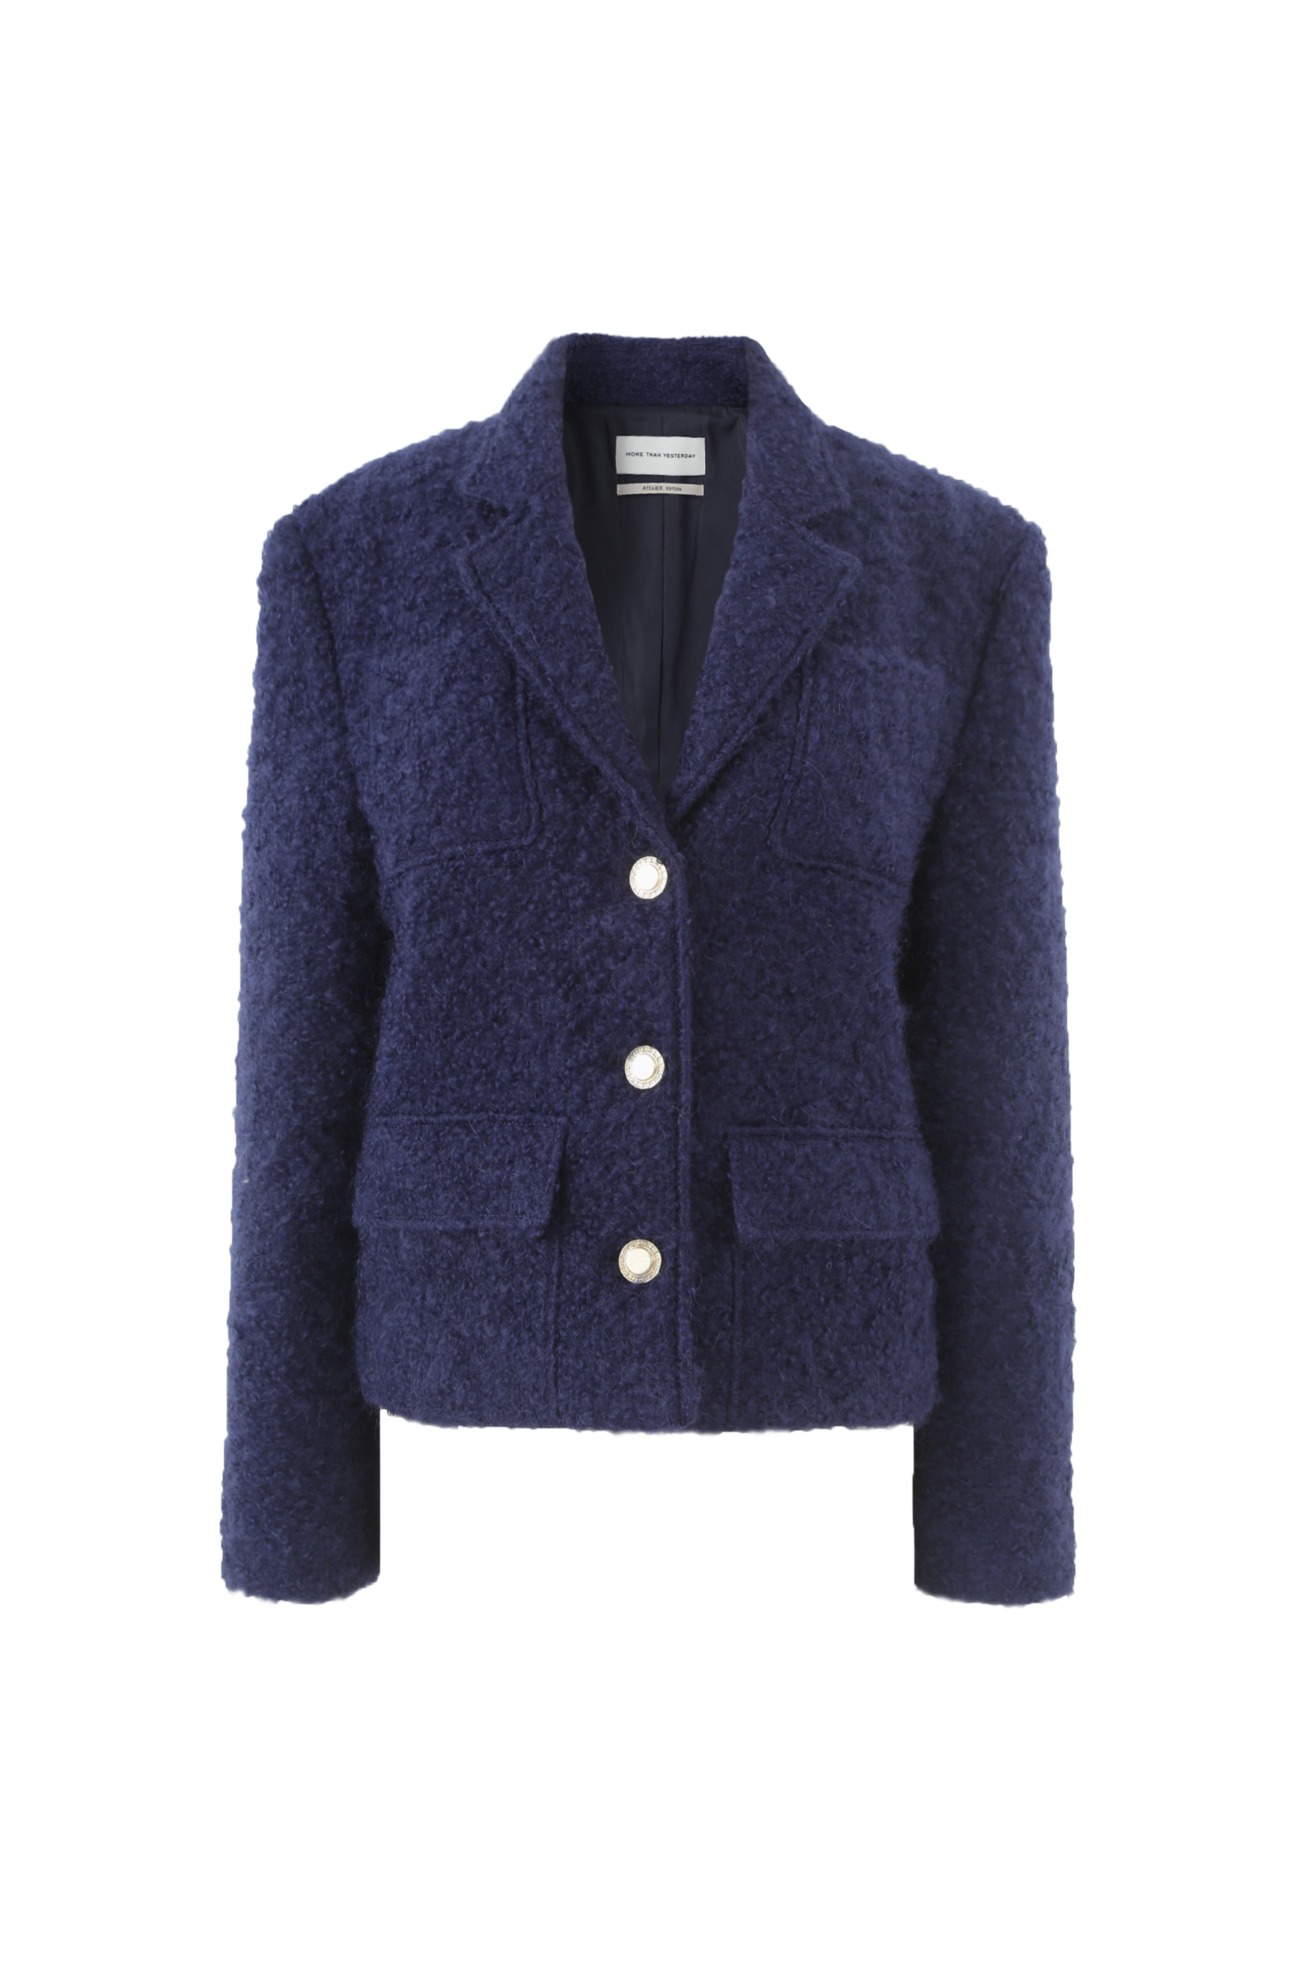 NON-BRUSHED MOHAIR JACKET (BLUE) ATELIER EDITION 